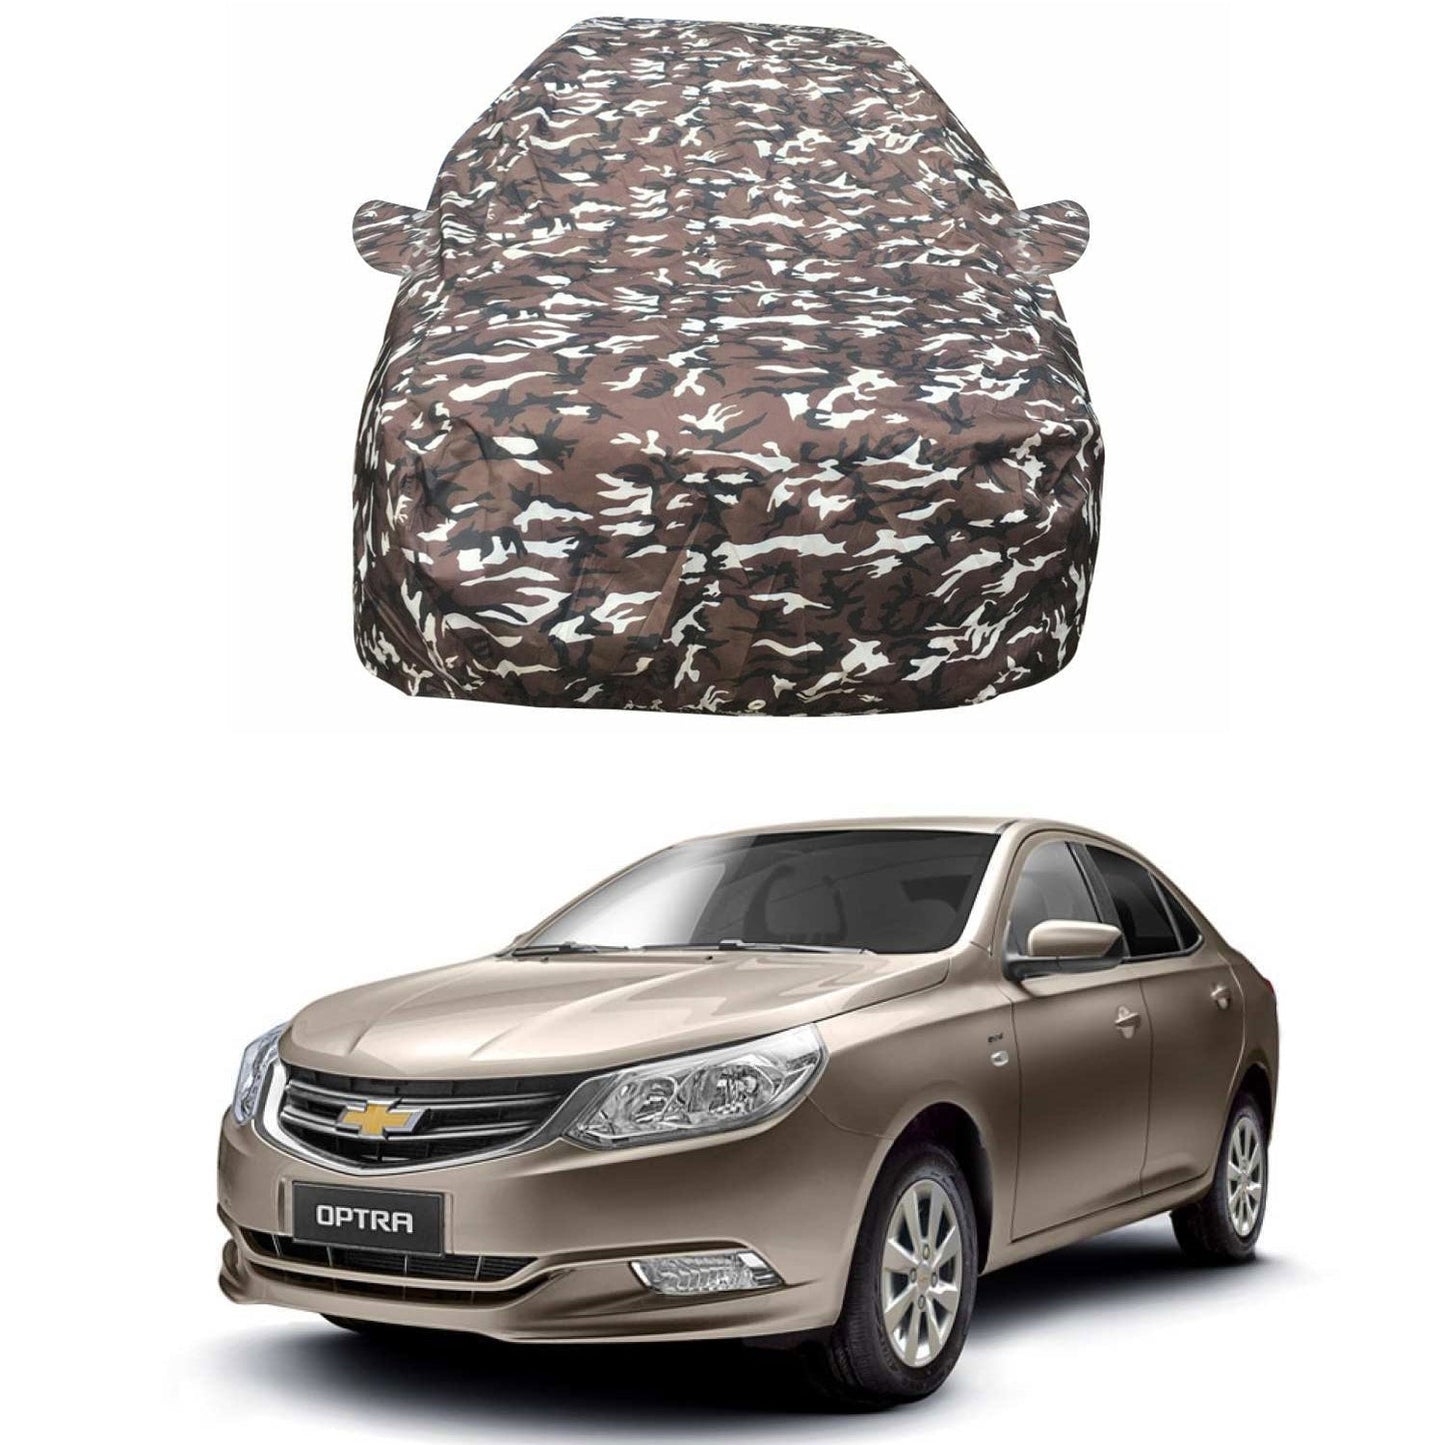 Oshotto Ranger Design Made of 100% Waterproof Fabric Multicolor Car Body Cover with Mirror Pocket For Chevrolet Optra